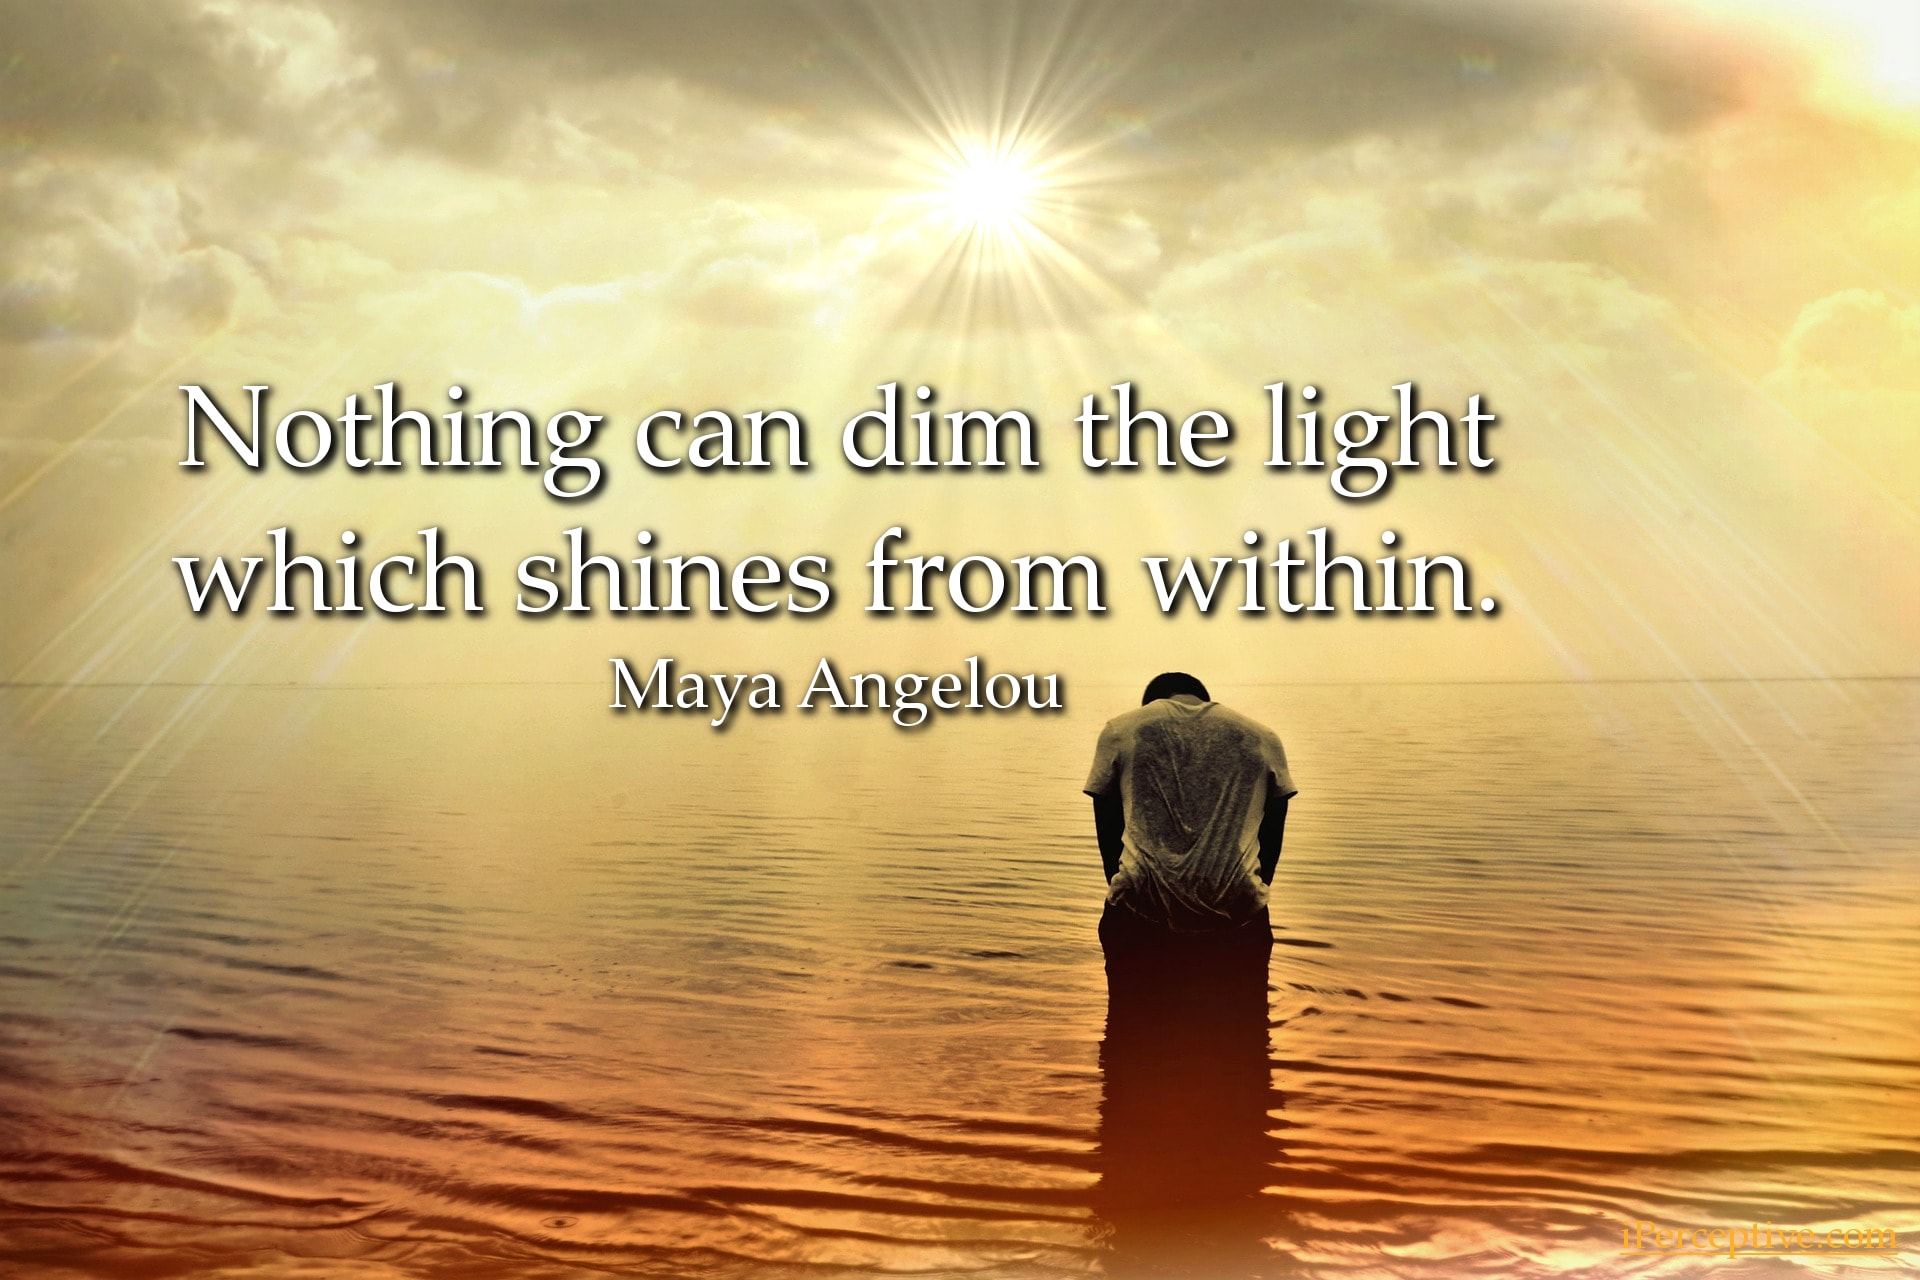 Maya Angelou Quote: Nothing can dim the light which shines from within...